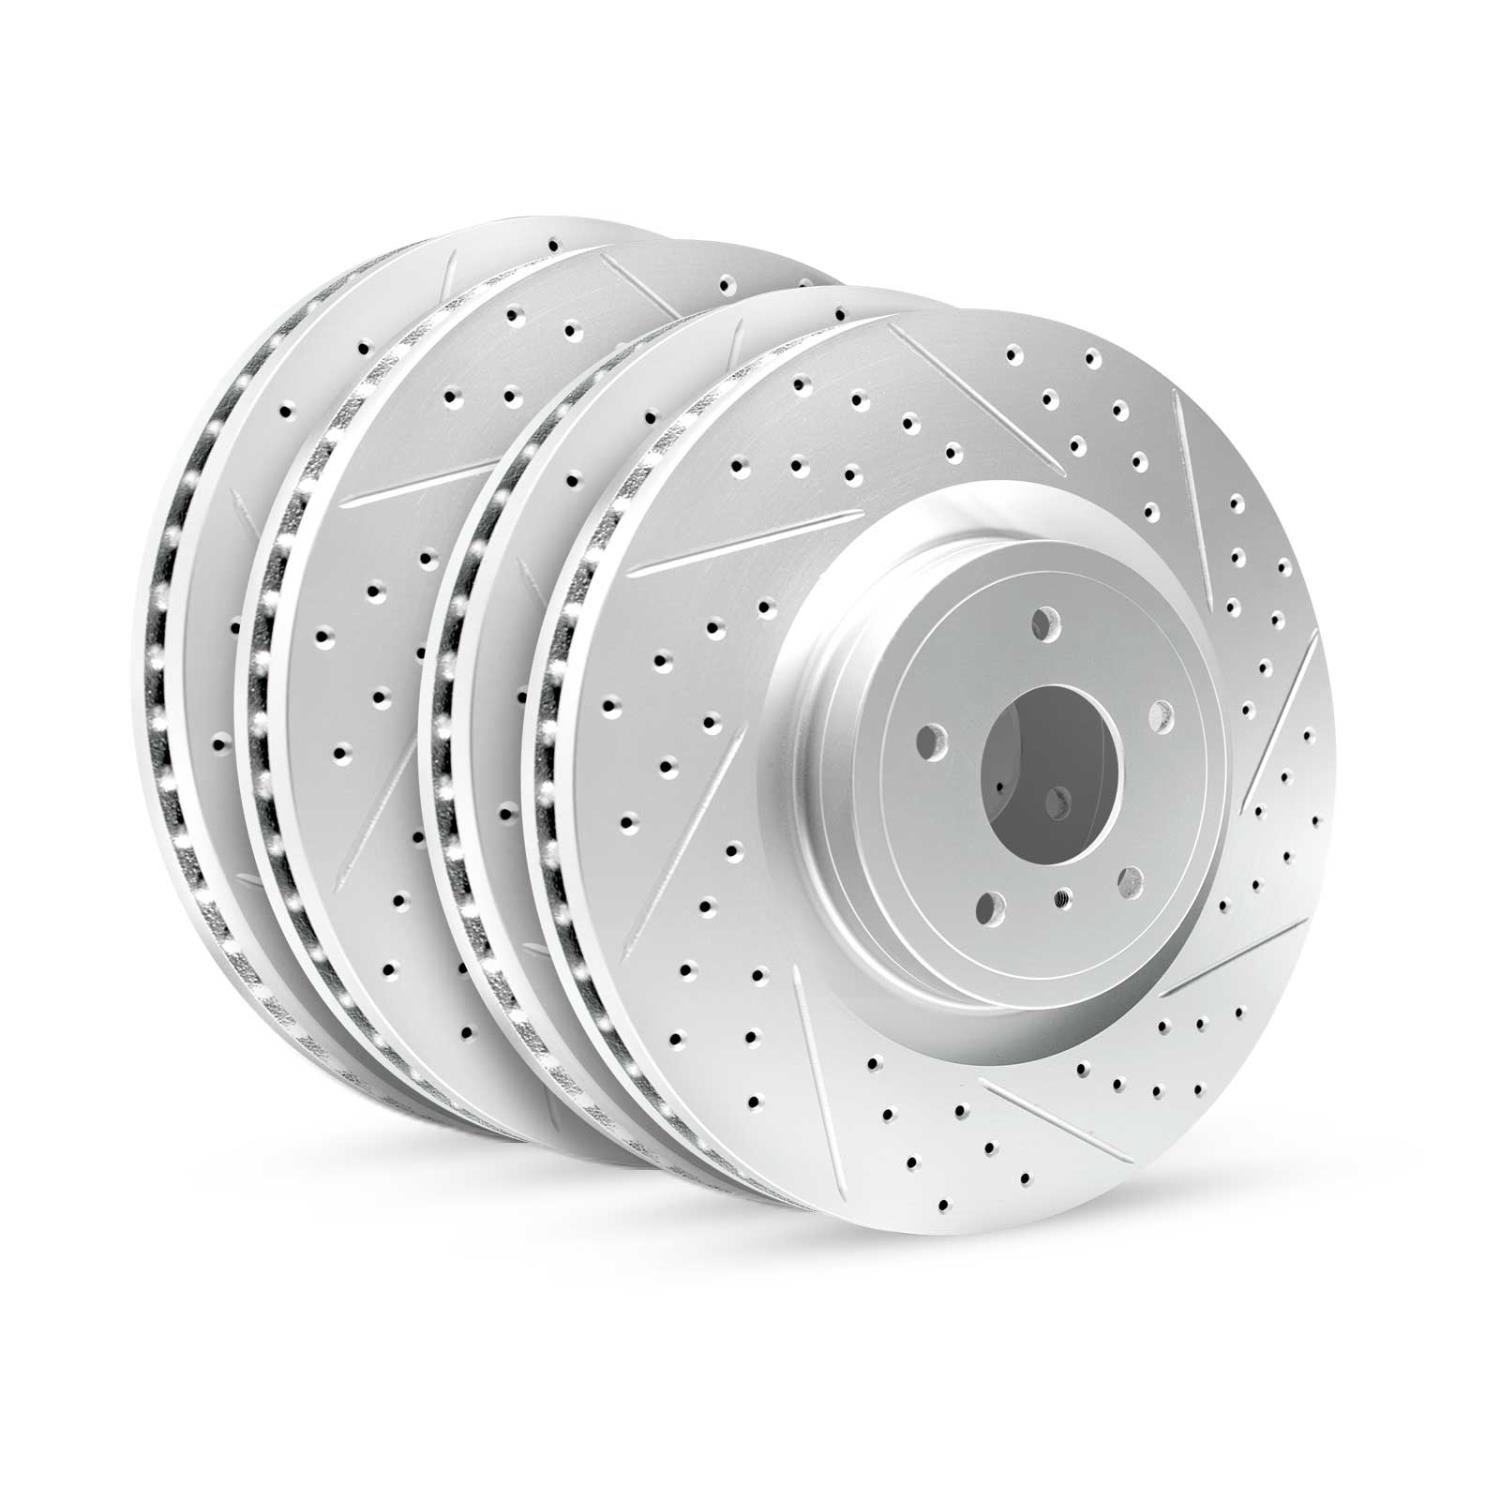 GEO-Carbon Drilled/Slotted Rotors, 2001-2002 BMW, Position: